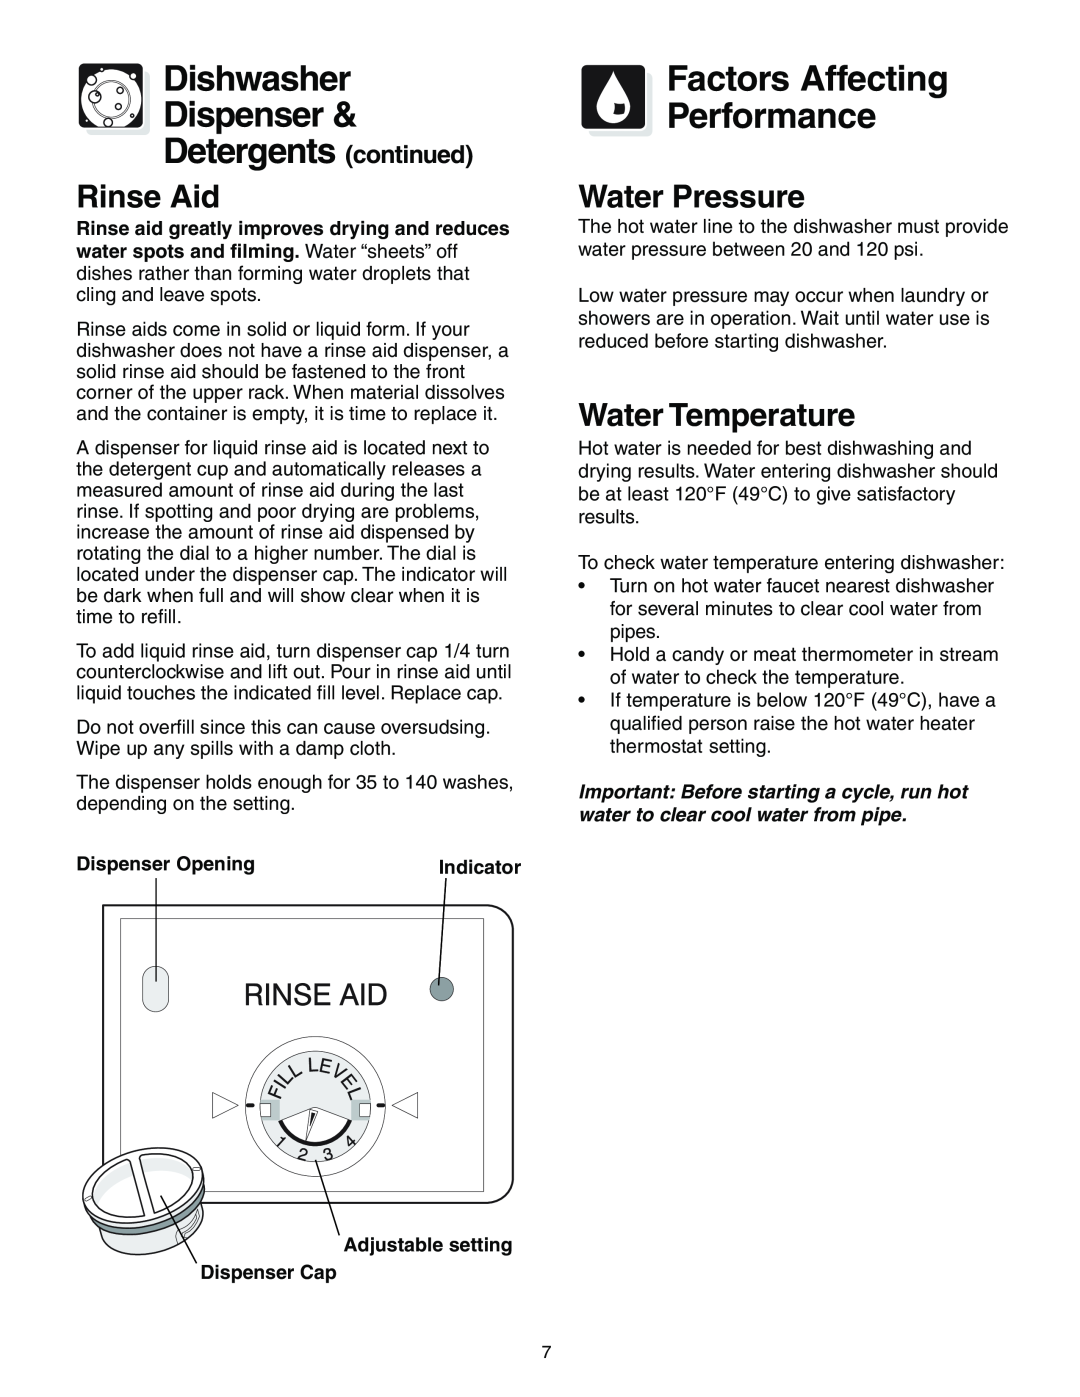 Crosley 200 Series Dishwasher Dispenser Detergents continued, Factors Affecting Performance, Rinse Aid, Water Pressure 